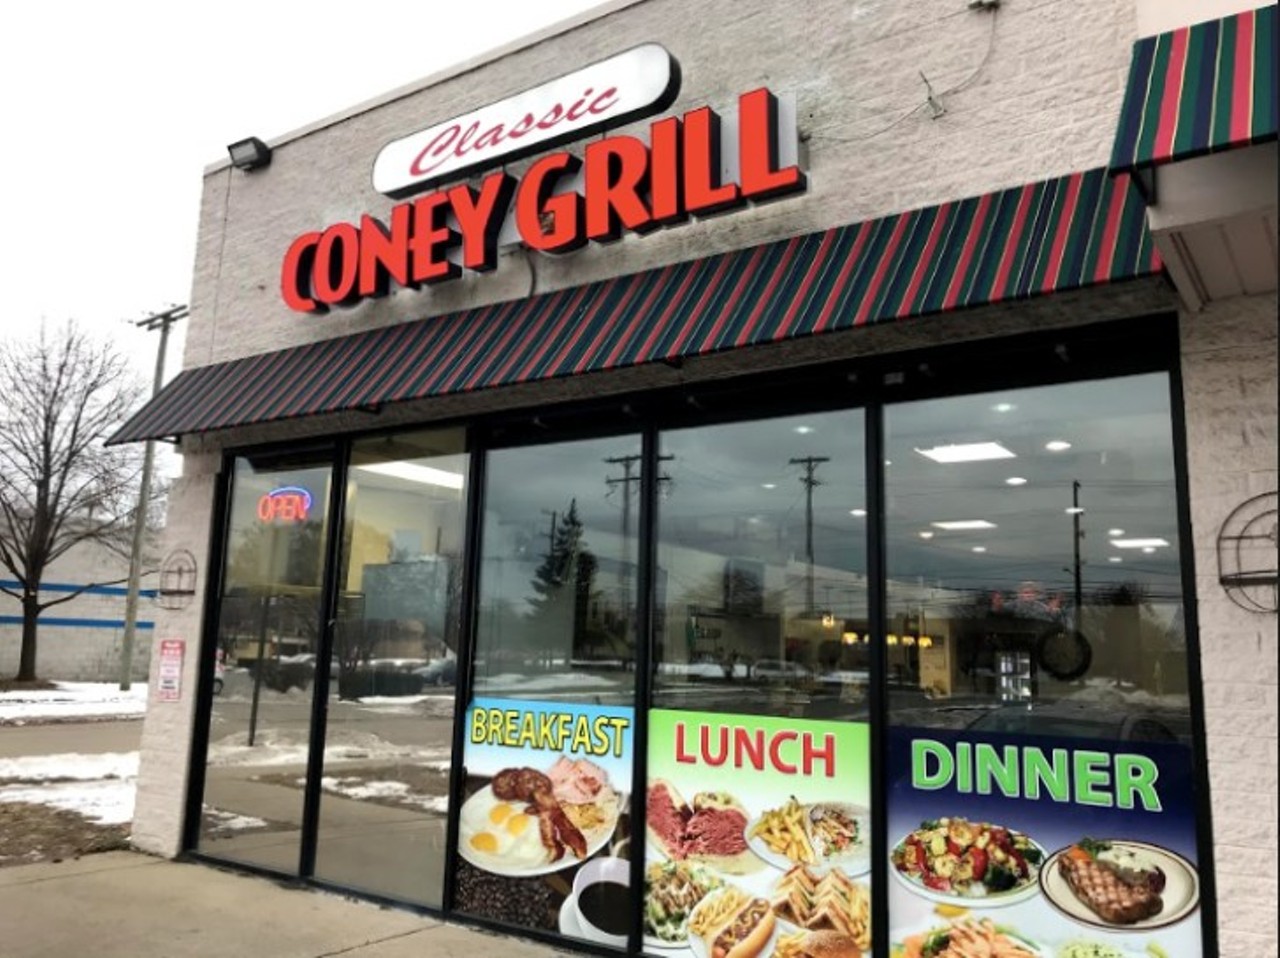 18. Classic Coney Grill
24041 Dequindre Rd., Hazel Park
Yes, a coney island in a strip mall in Hazel Park can be just as delicious as the rest.
Photo by Mike Dionne